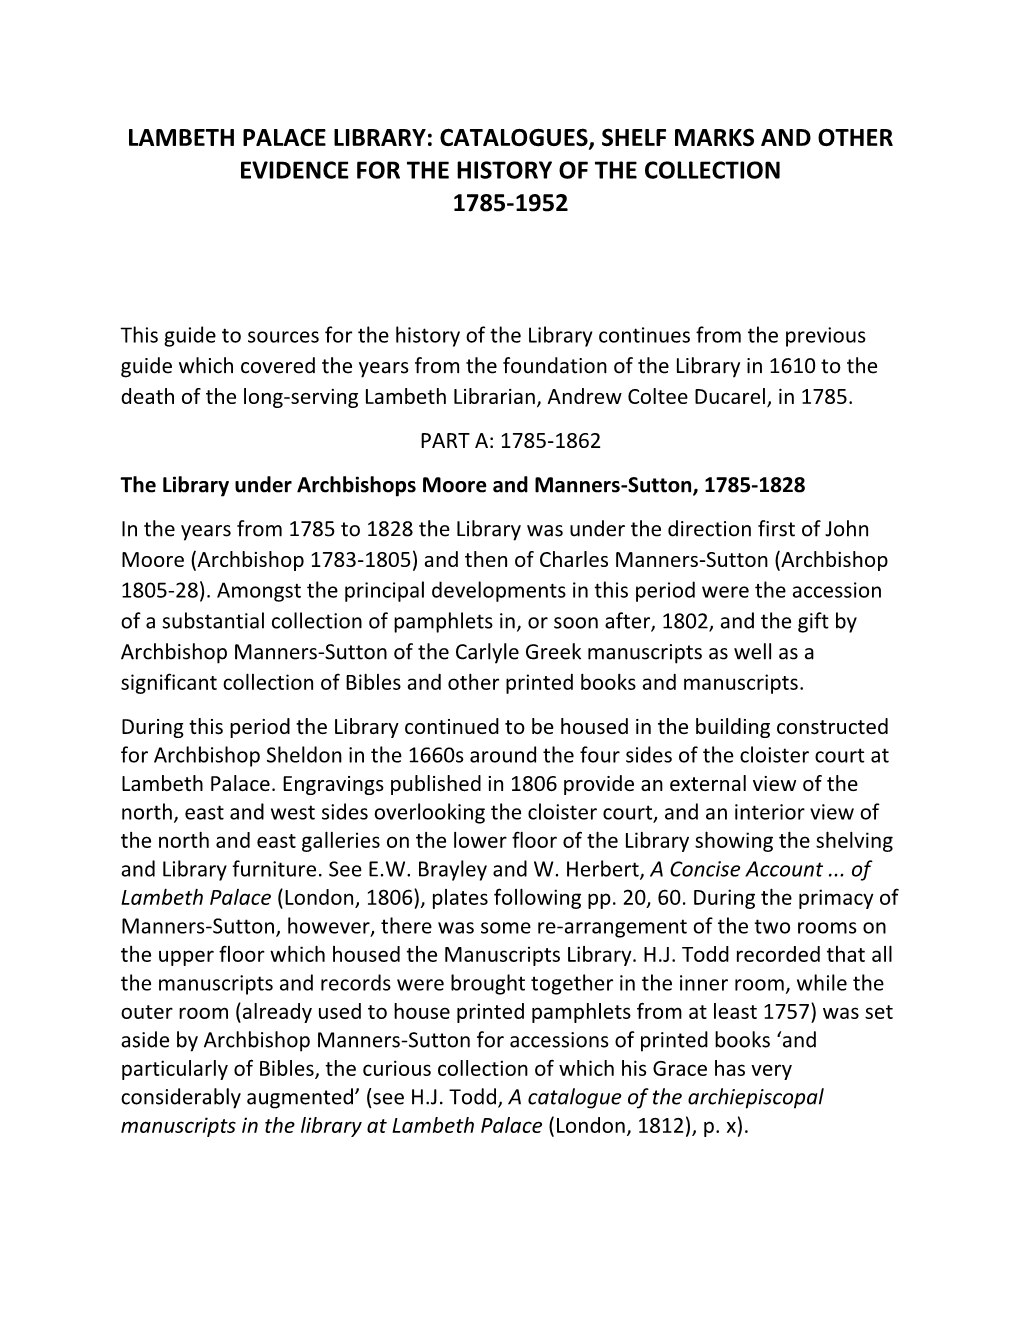 Catalogues, Shelf Marks and Other Evidence for the History of the Collection 1785-1952